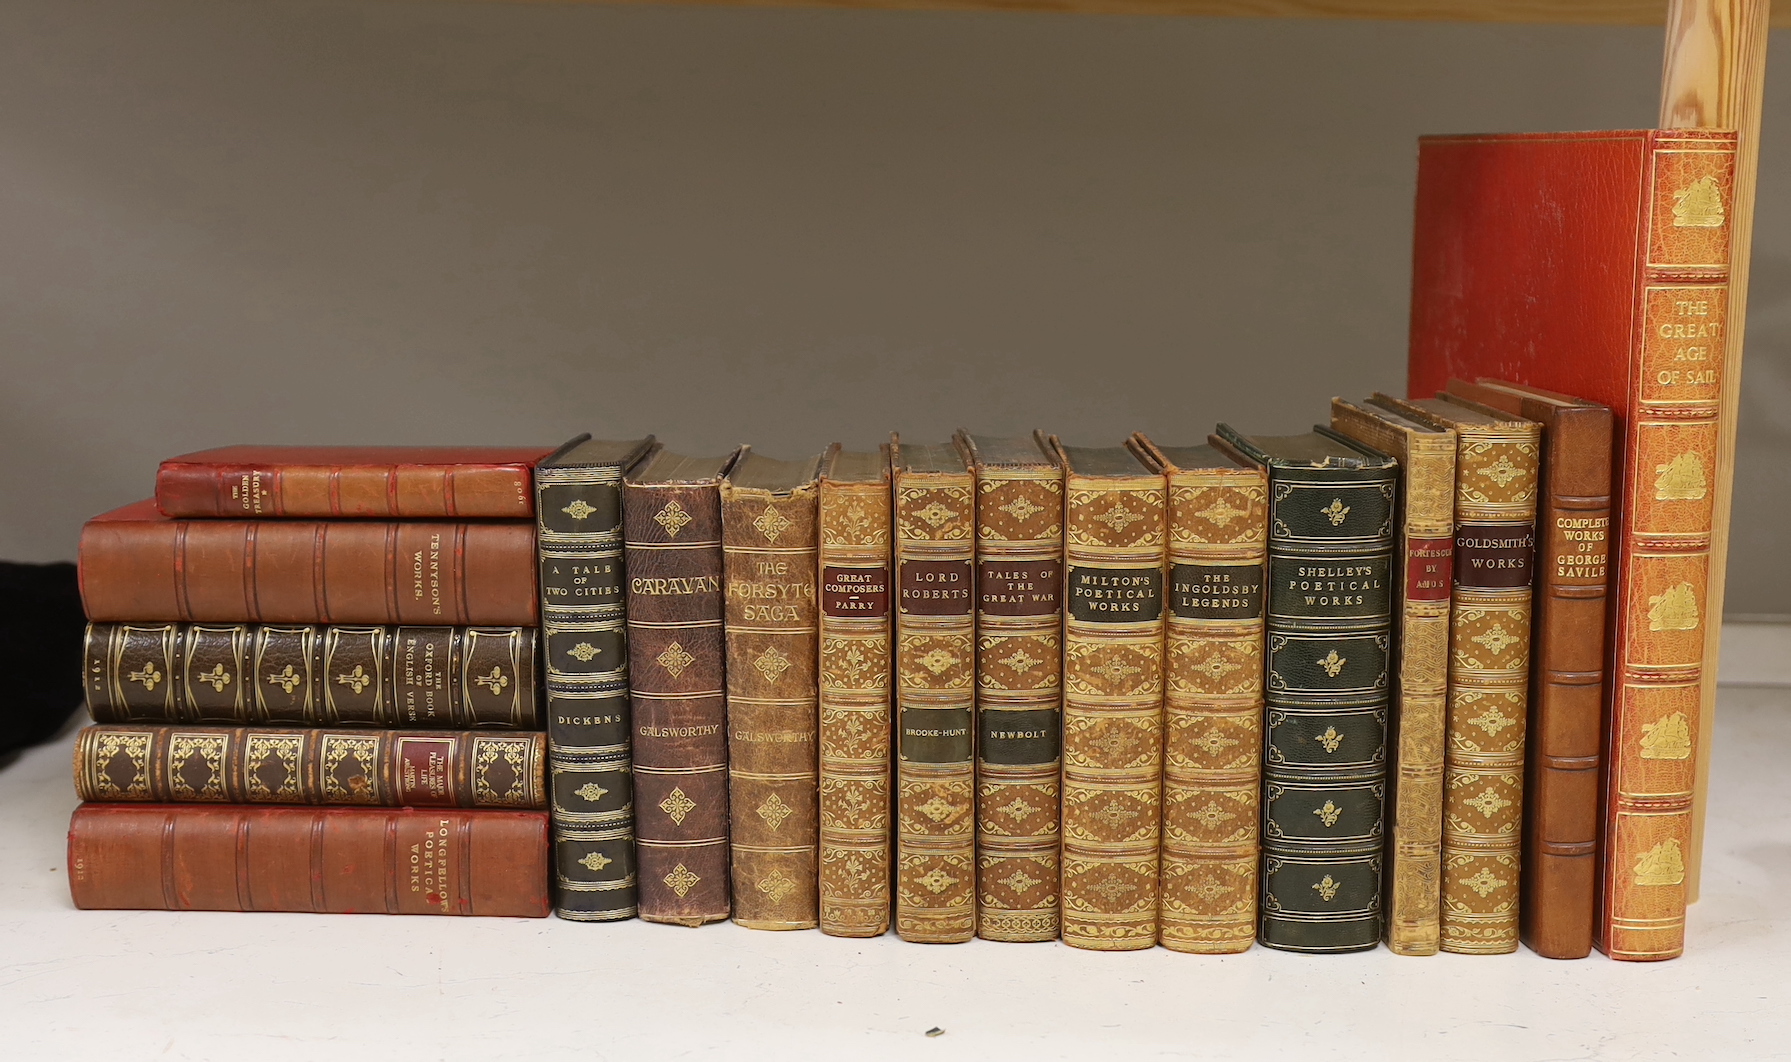 Eighteen volumes full calf leather bindings, including The Great Age of Sail, Shelley’s Poetical Works and other poetry volumes